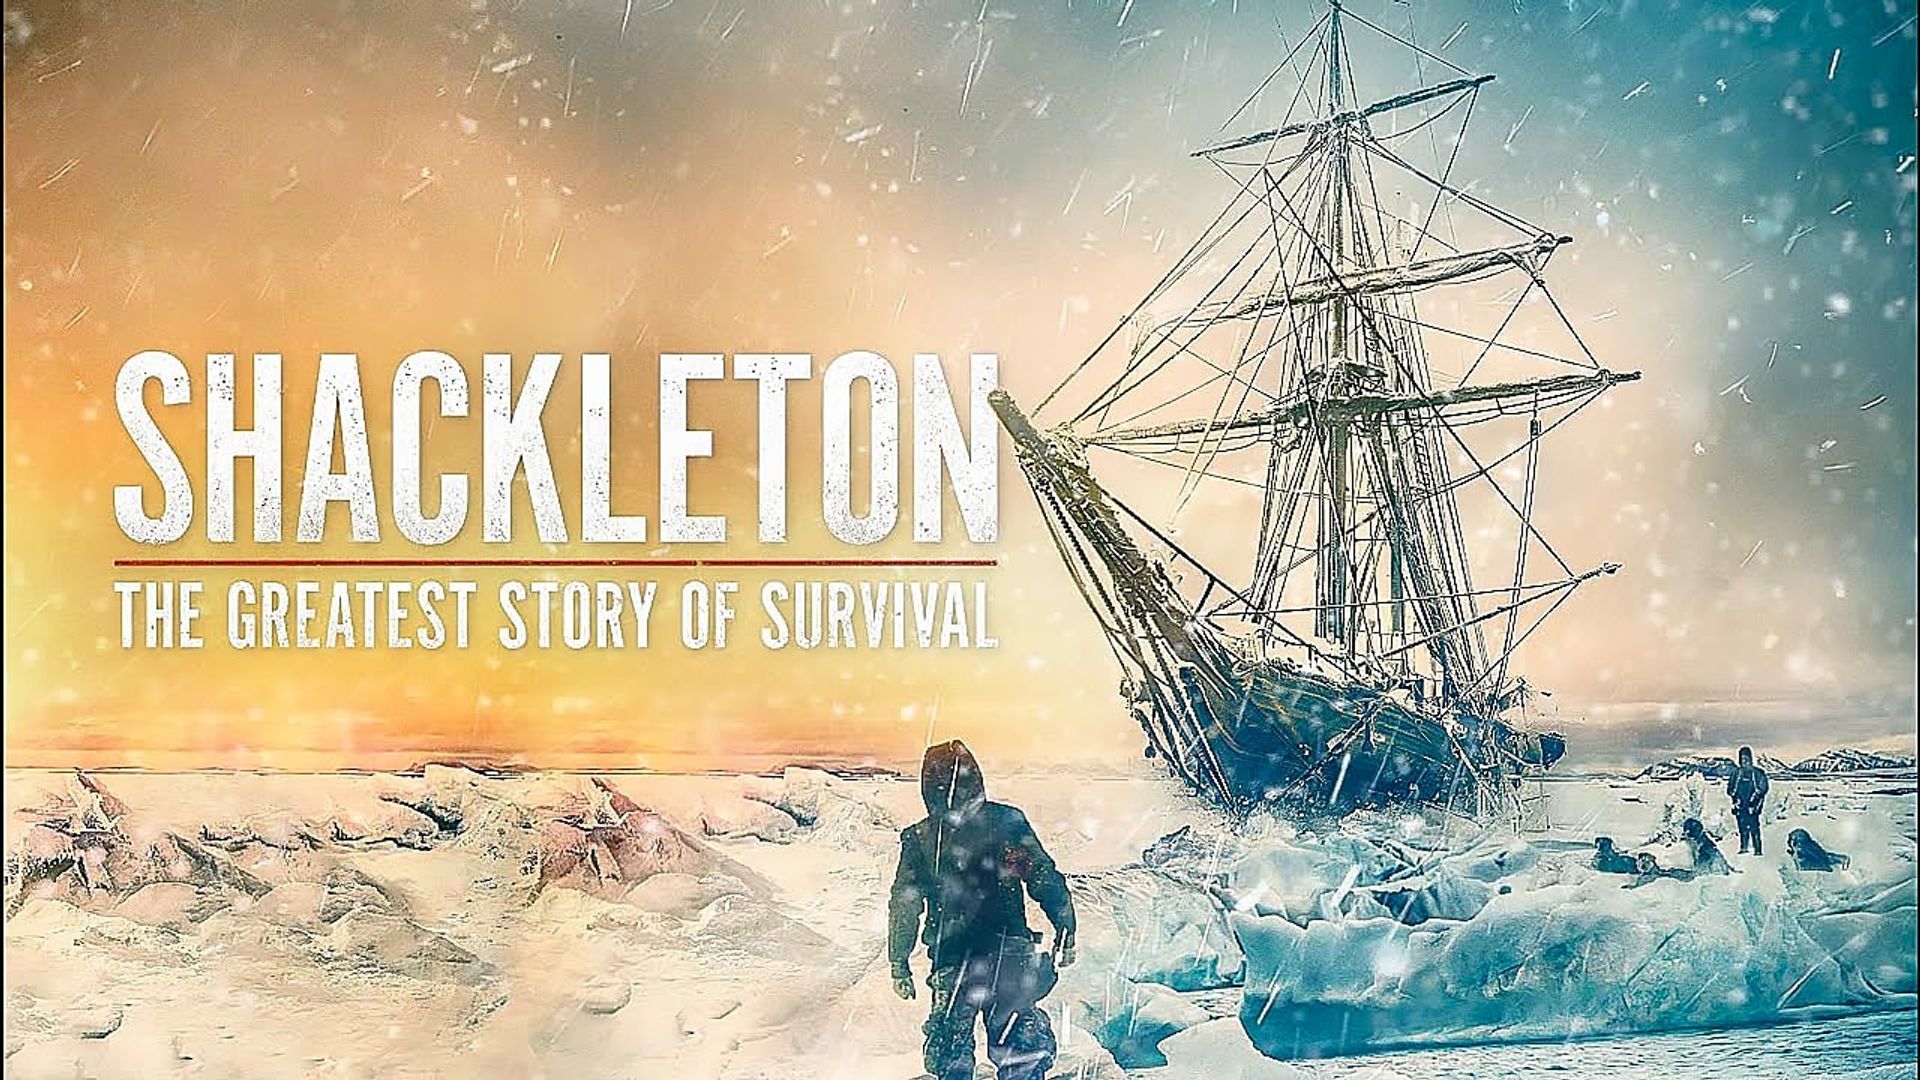 Shackleton: The Greatest Story of Survival background